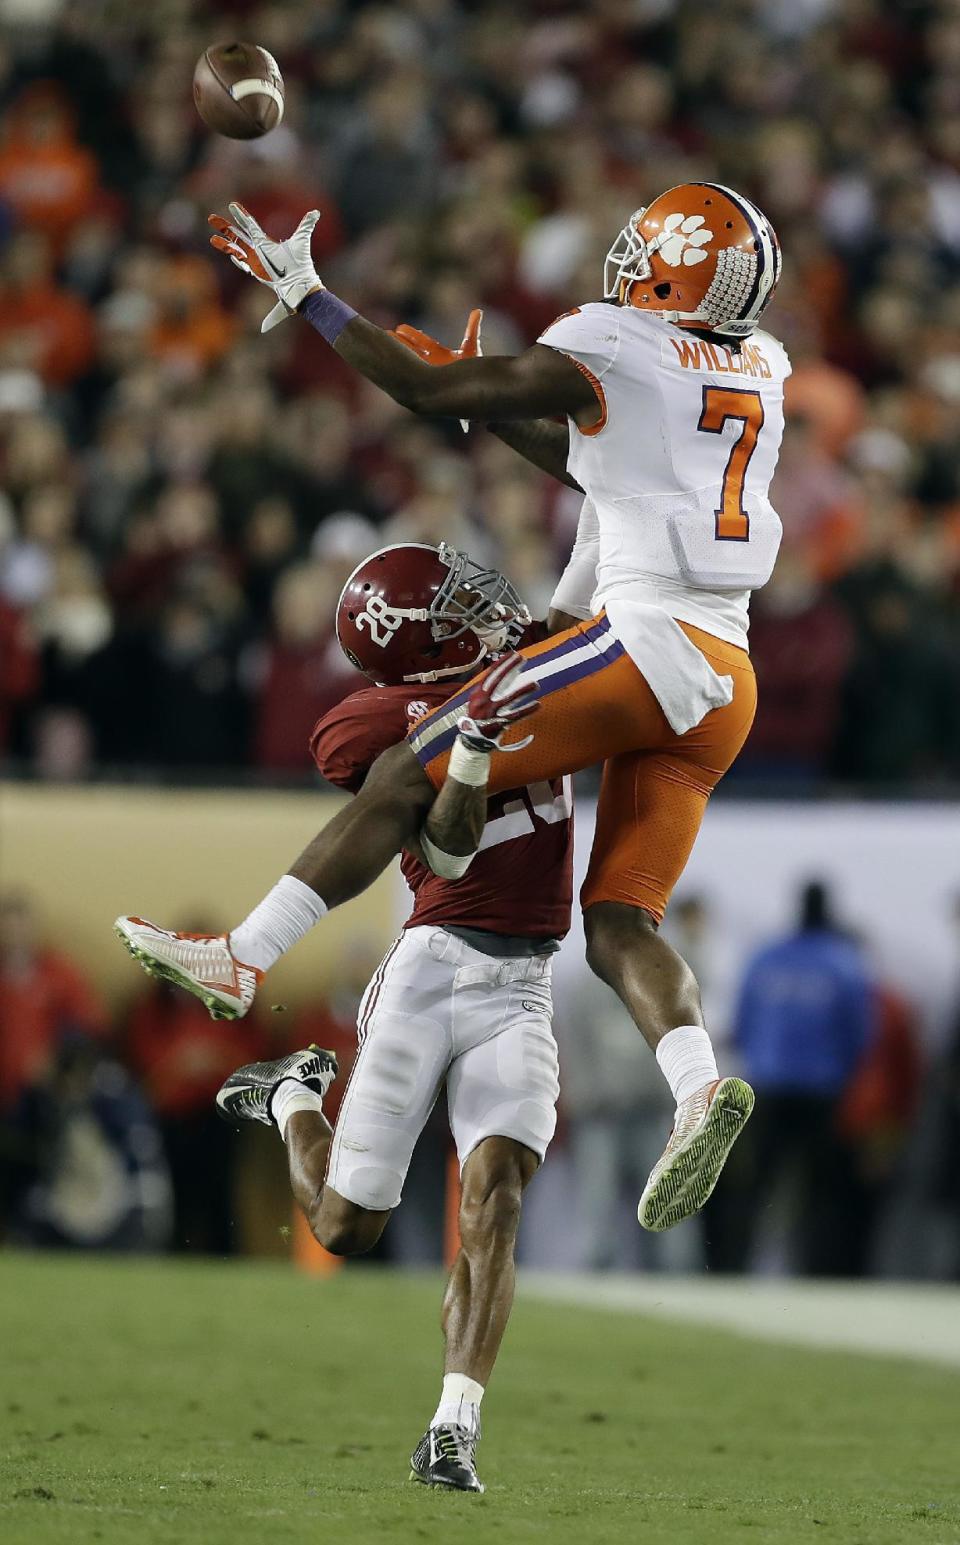 Clemson's Mike Williams catches a pass over Alabama's Anthony Averett during the second half of the NCAA college football playoff championship game Tuesday, Jan. 10, 2017, in Tampa, Fla. (AP Photo/Chris O'Meara)